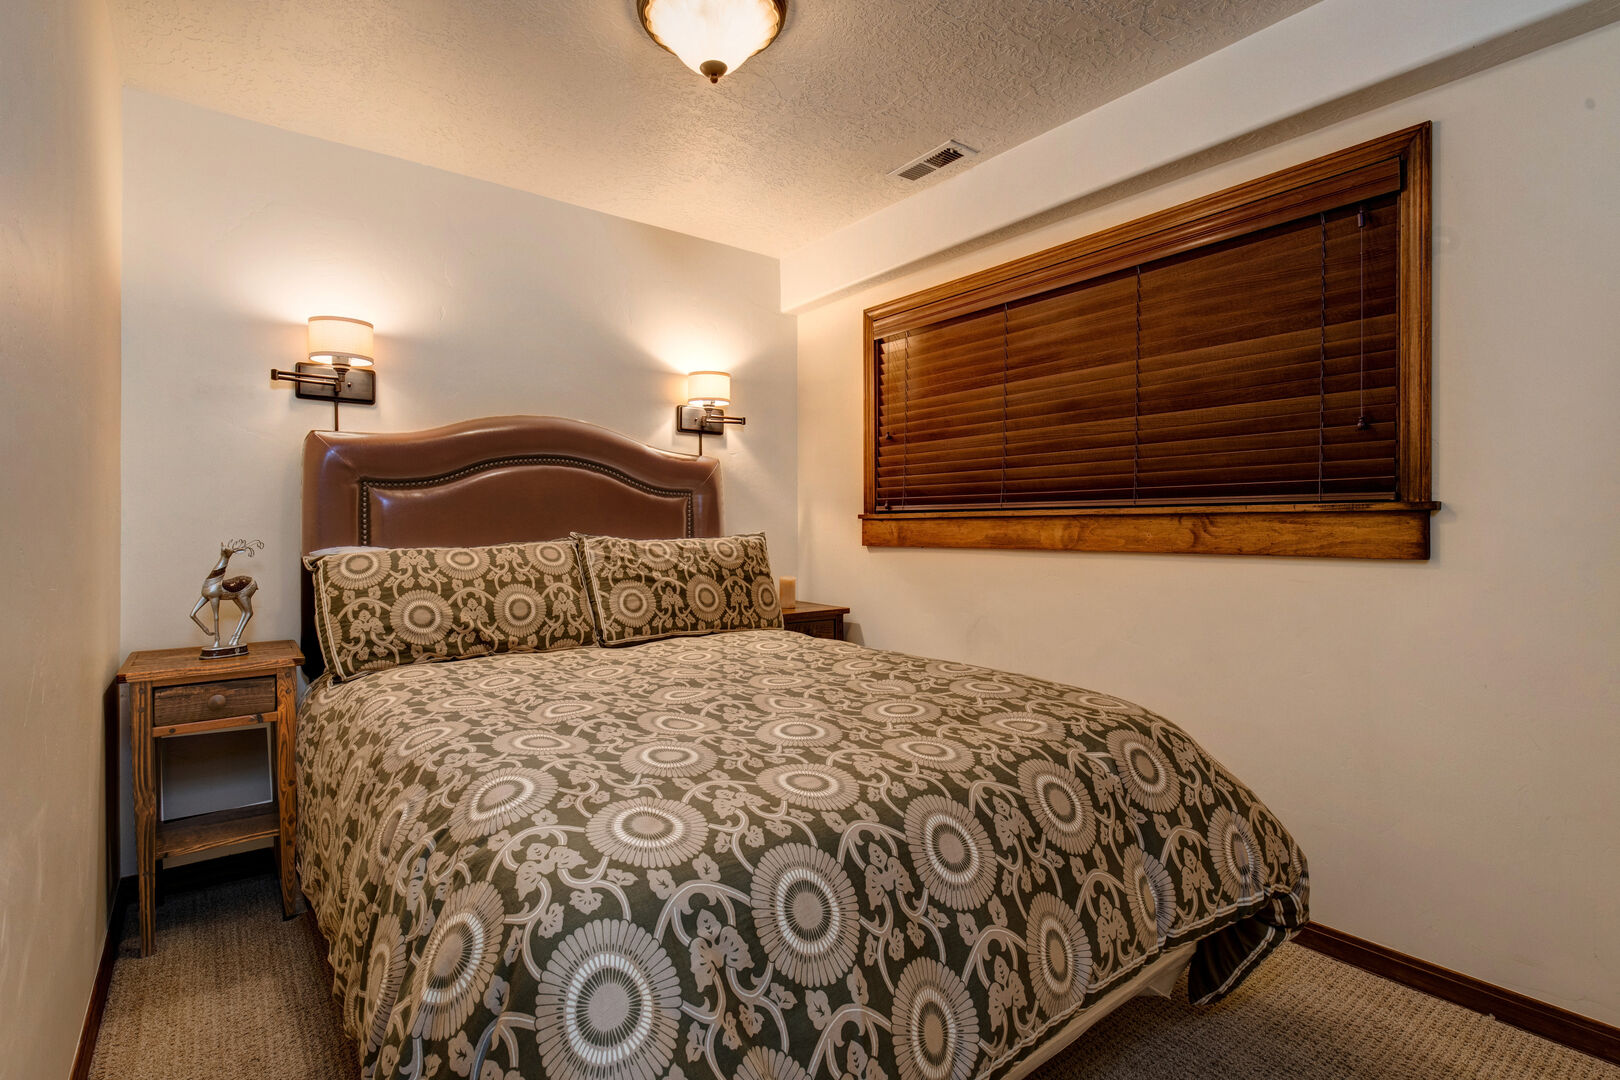 Bedroom 5 | Lower Level, Queen Bed, TV, Full Bath with Shower/Tub Combo Shared with Bedroom 6